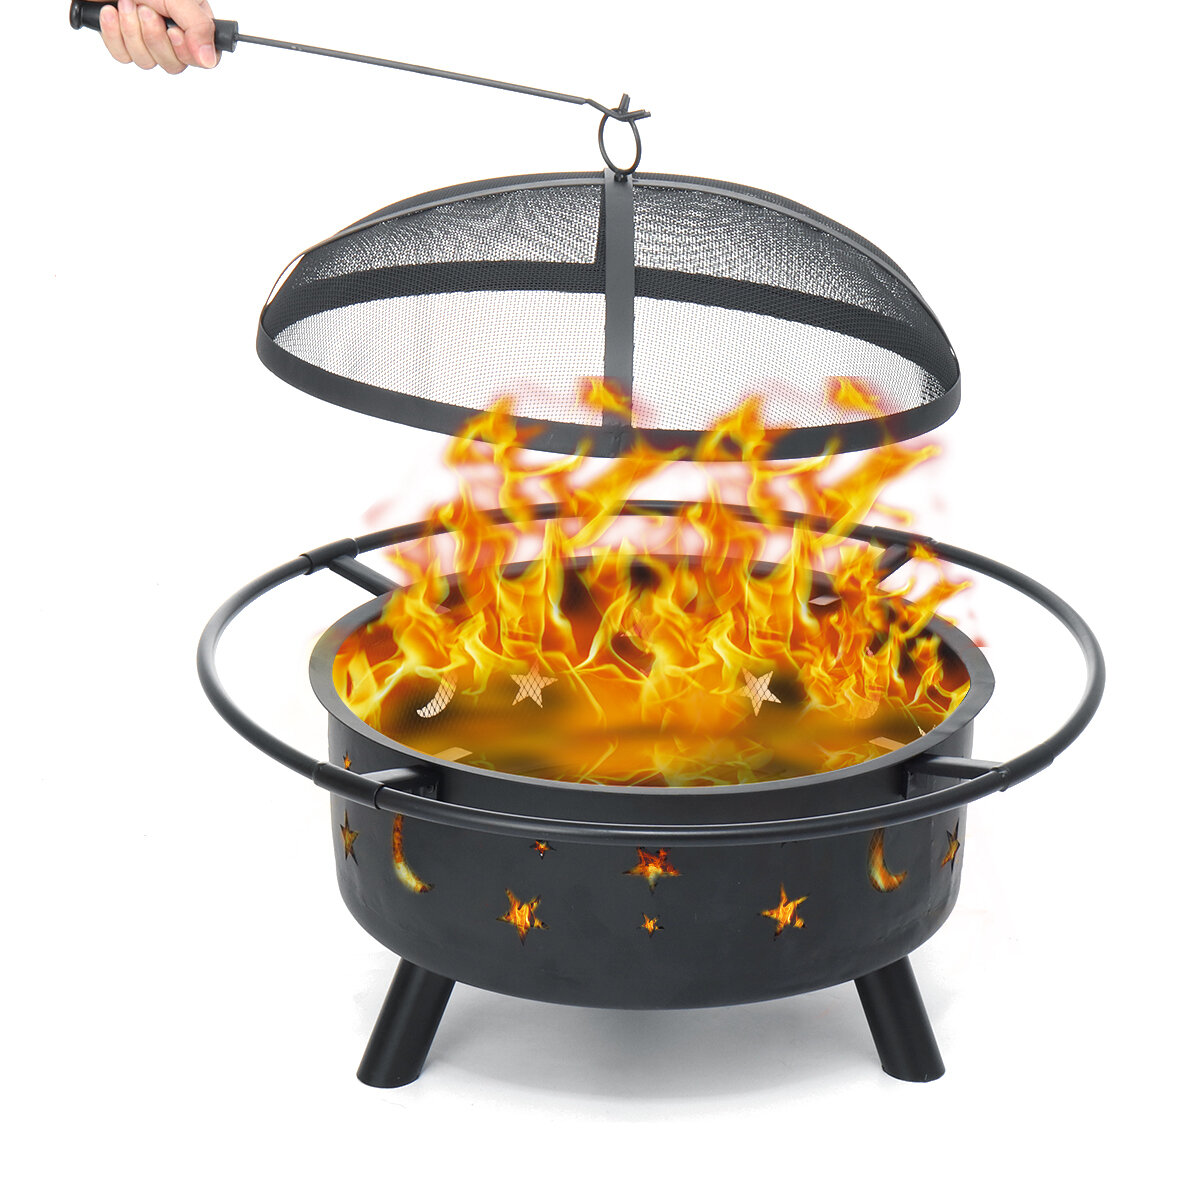 Image of SinglyFire 30"Wood Burning Fire PitsIron Black Camping Metal Firepits with Poker Manual